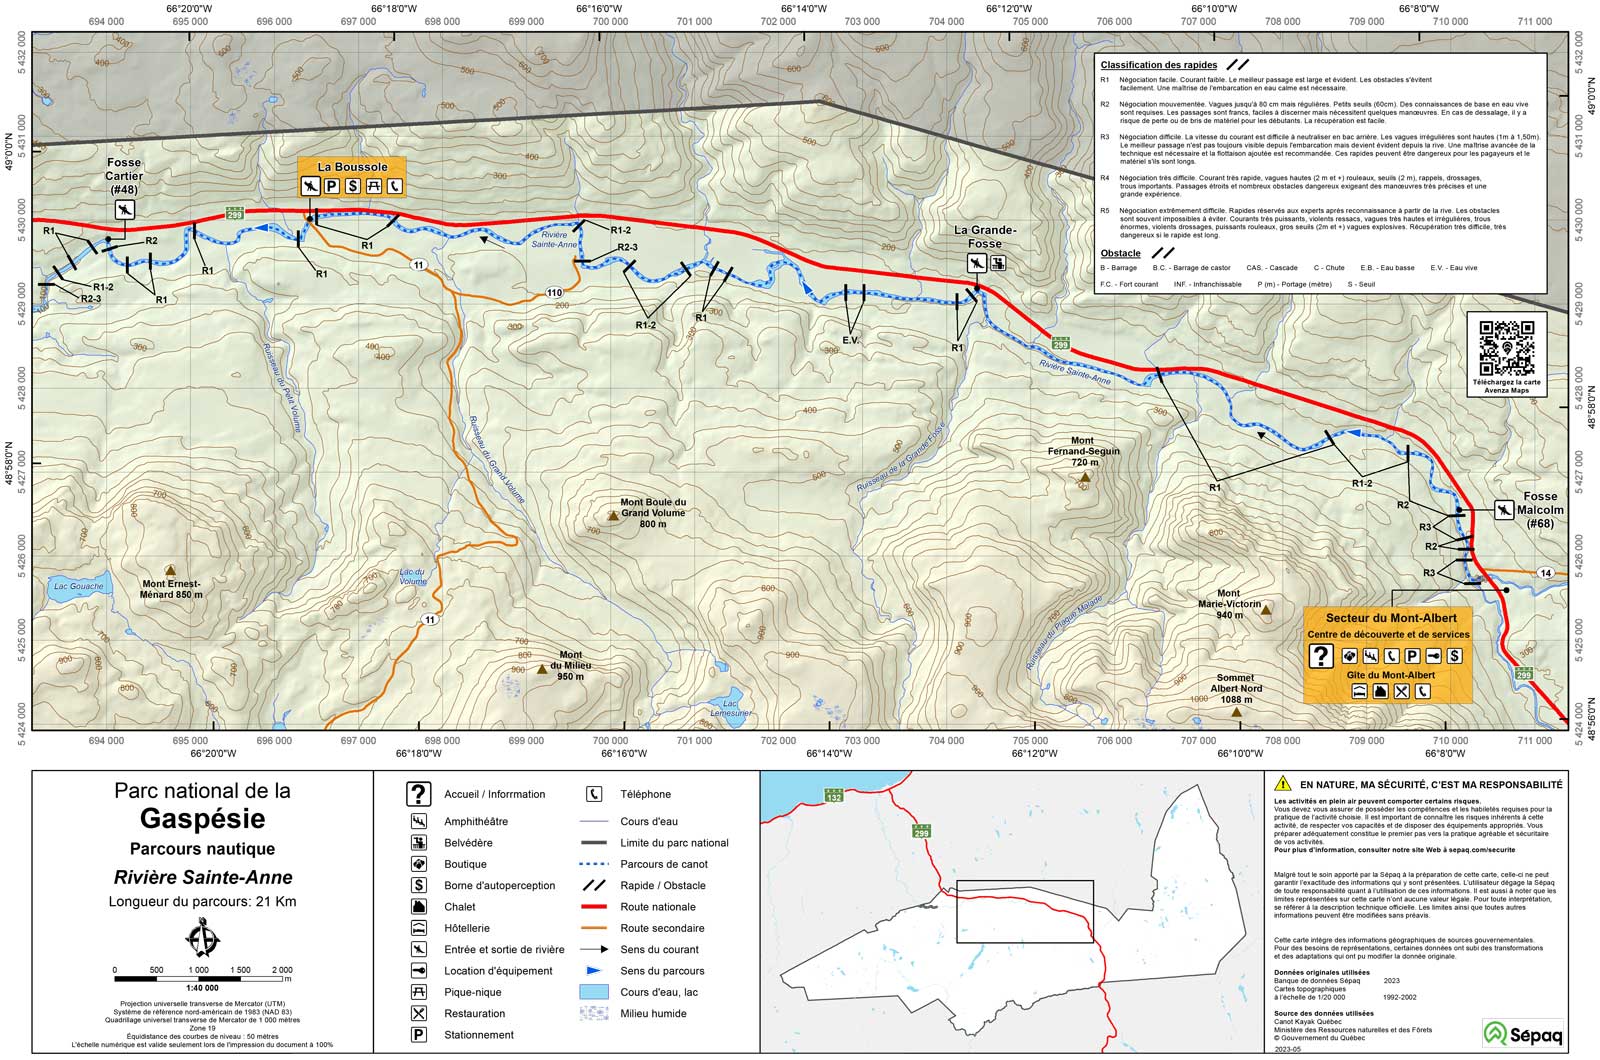 White Water River map of Gaspesie National Park